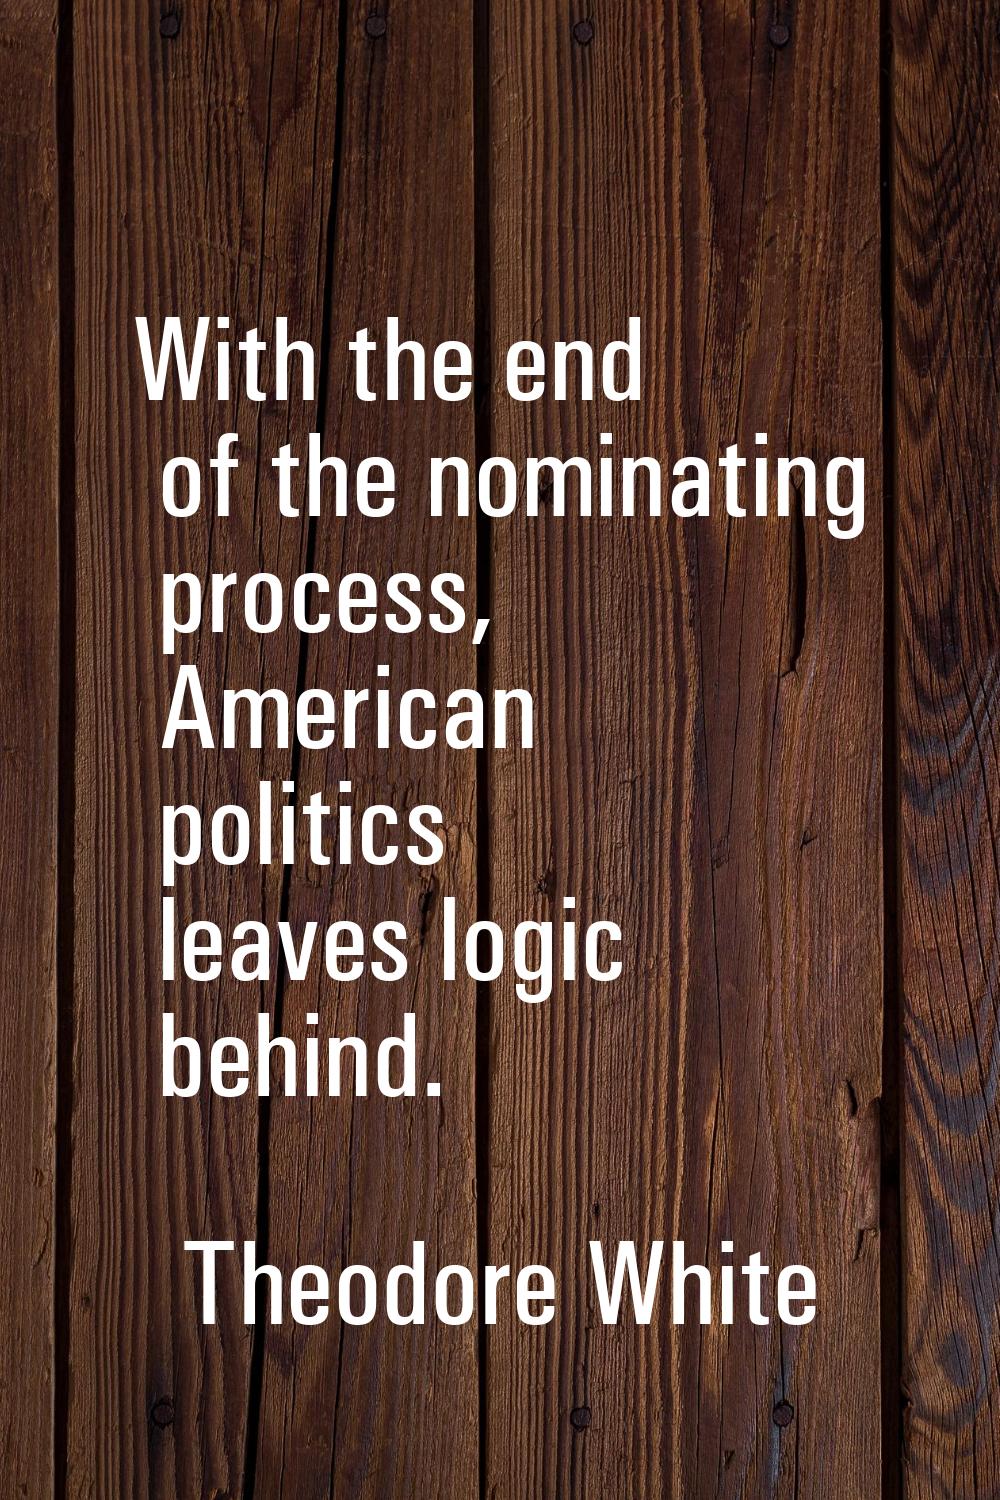 With the end of the nominating process, American politics leaves logic behind.